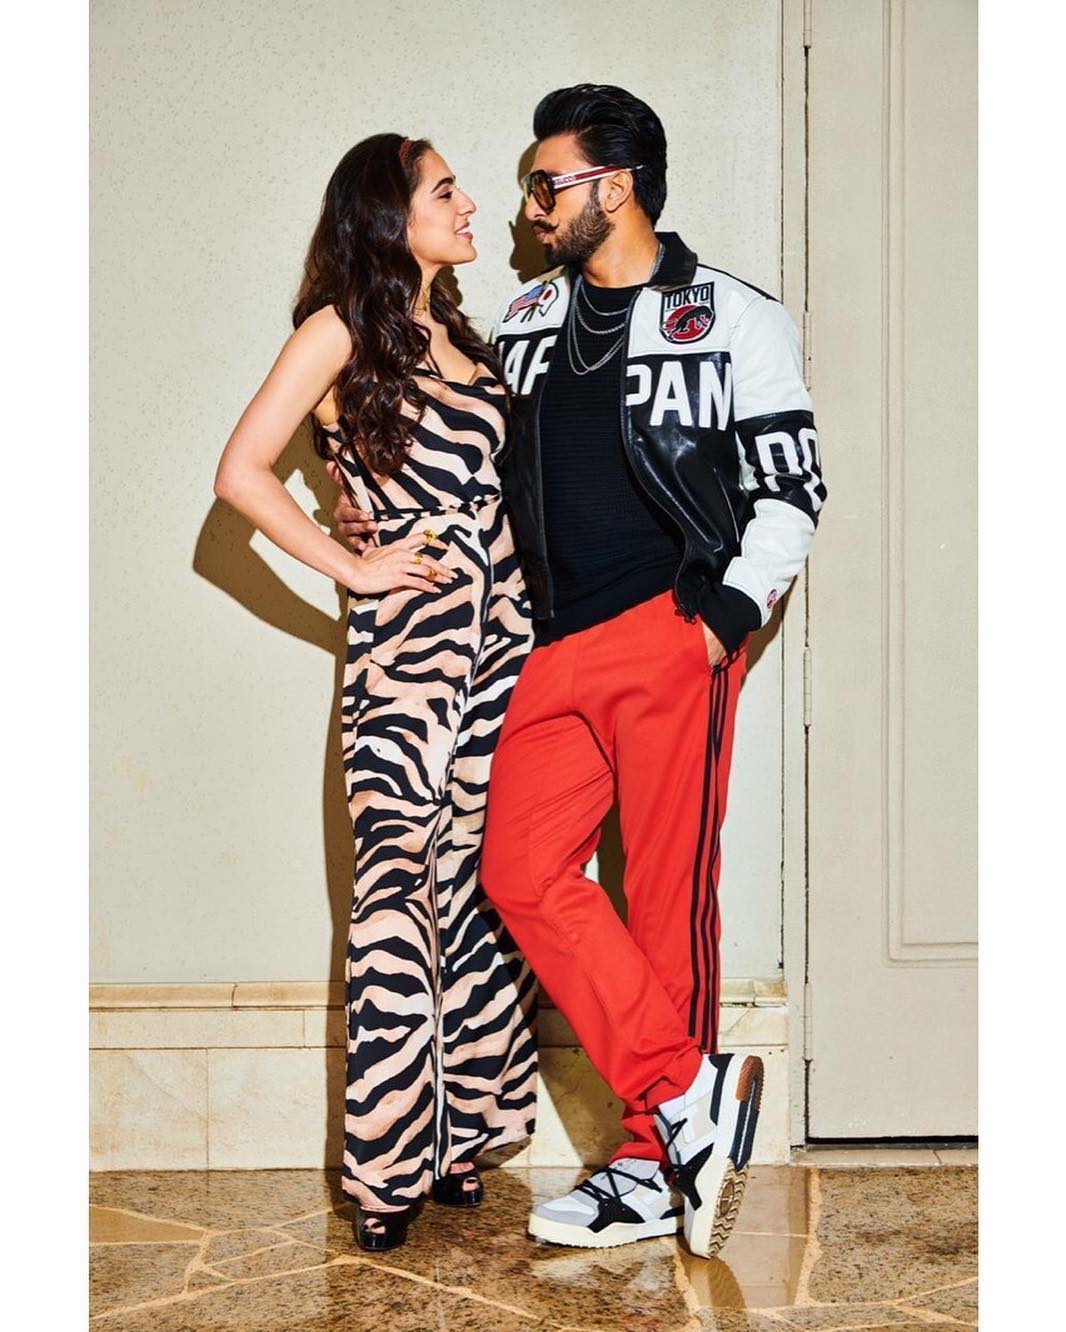 Sara Ali Khan and Ranveer Singh complement each other very well